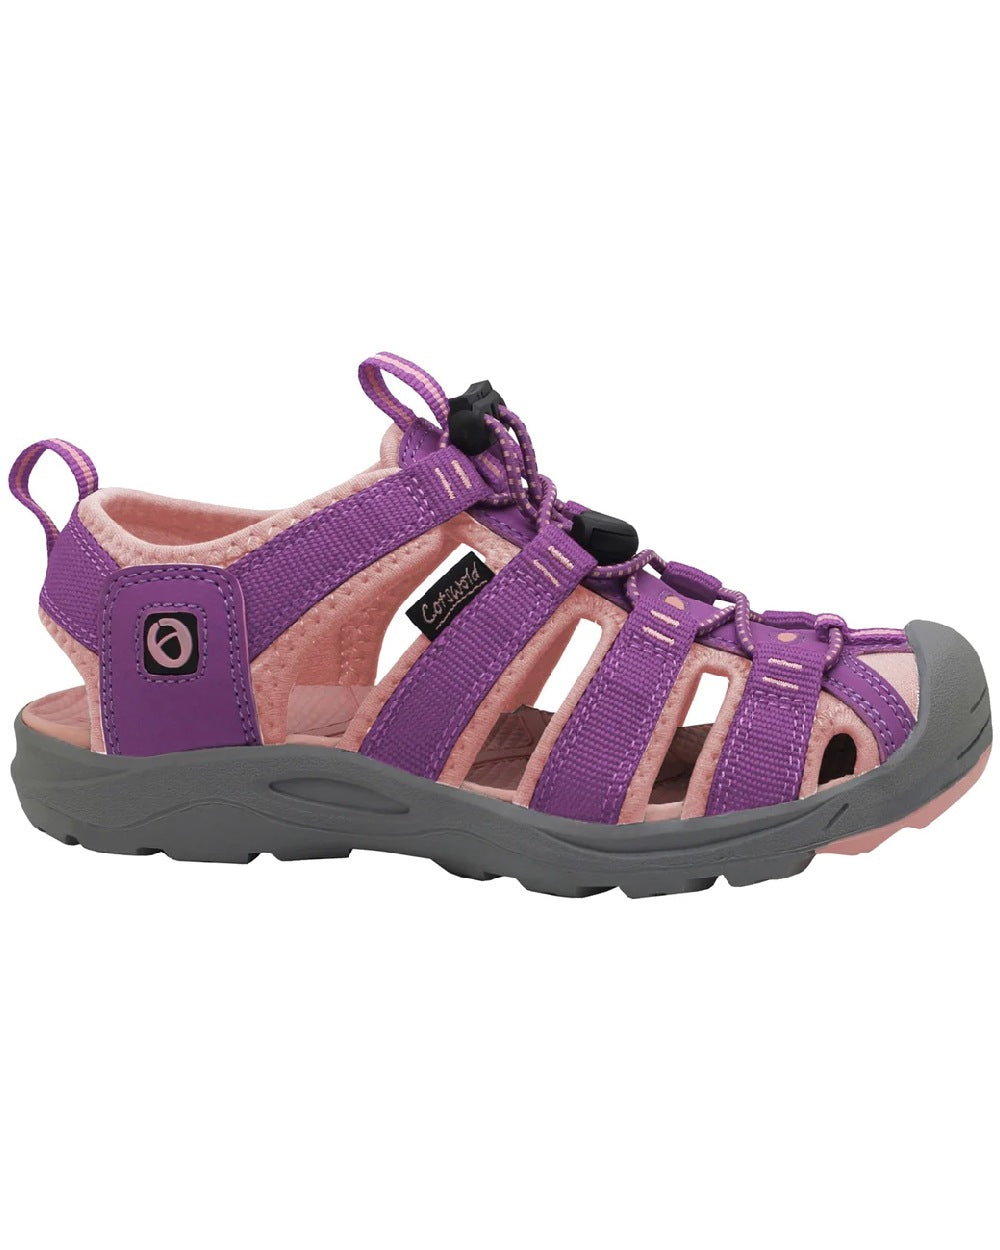 Cotswold Childrens Marshfield Recycled Sandals in Purple 